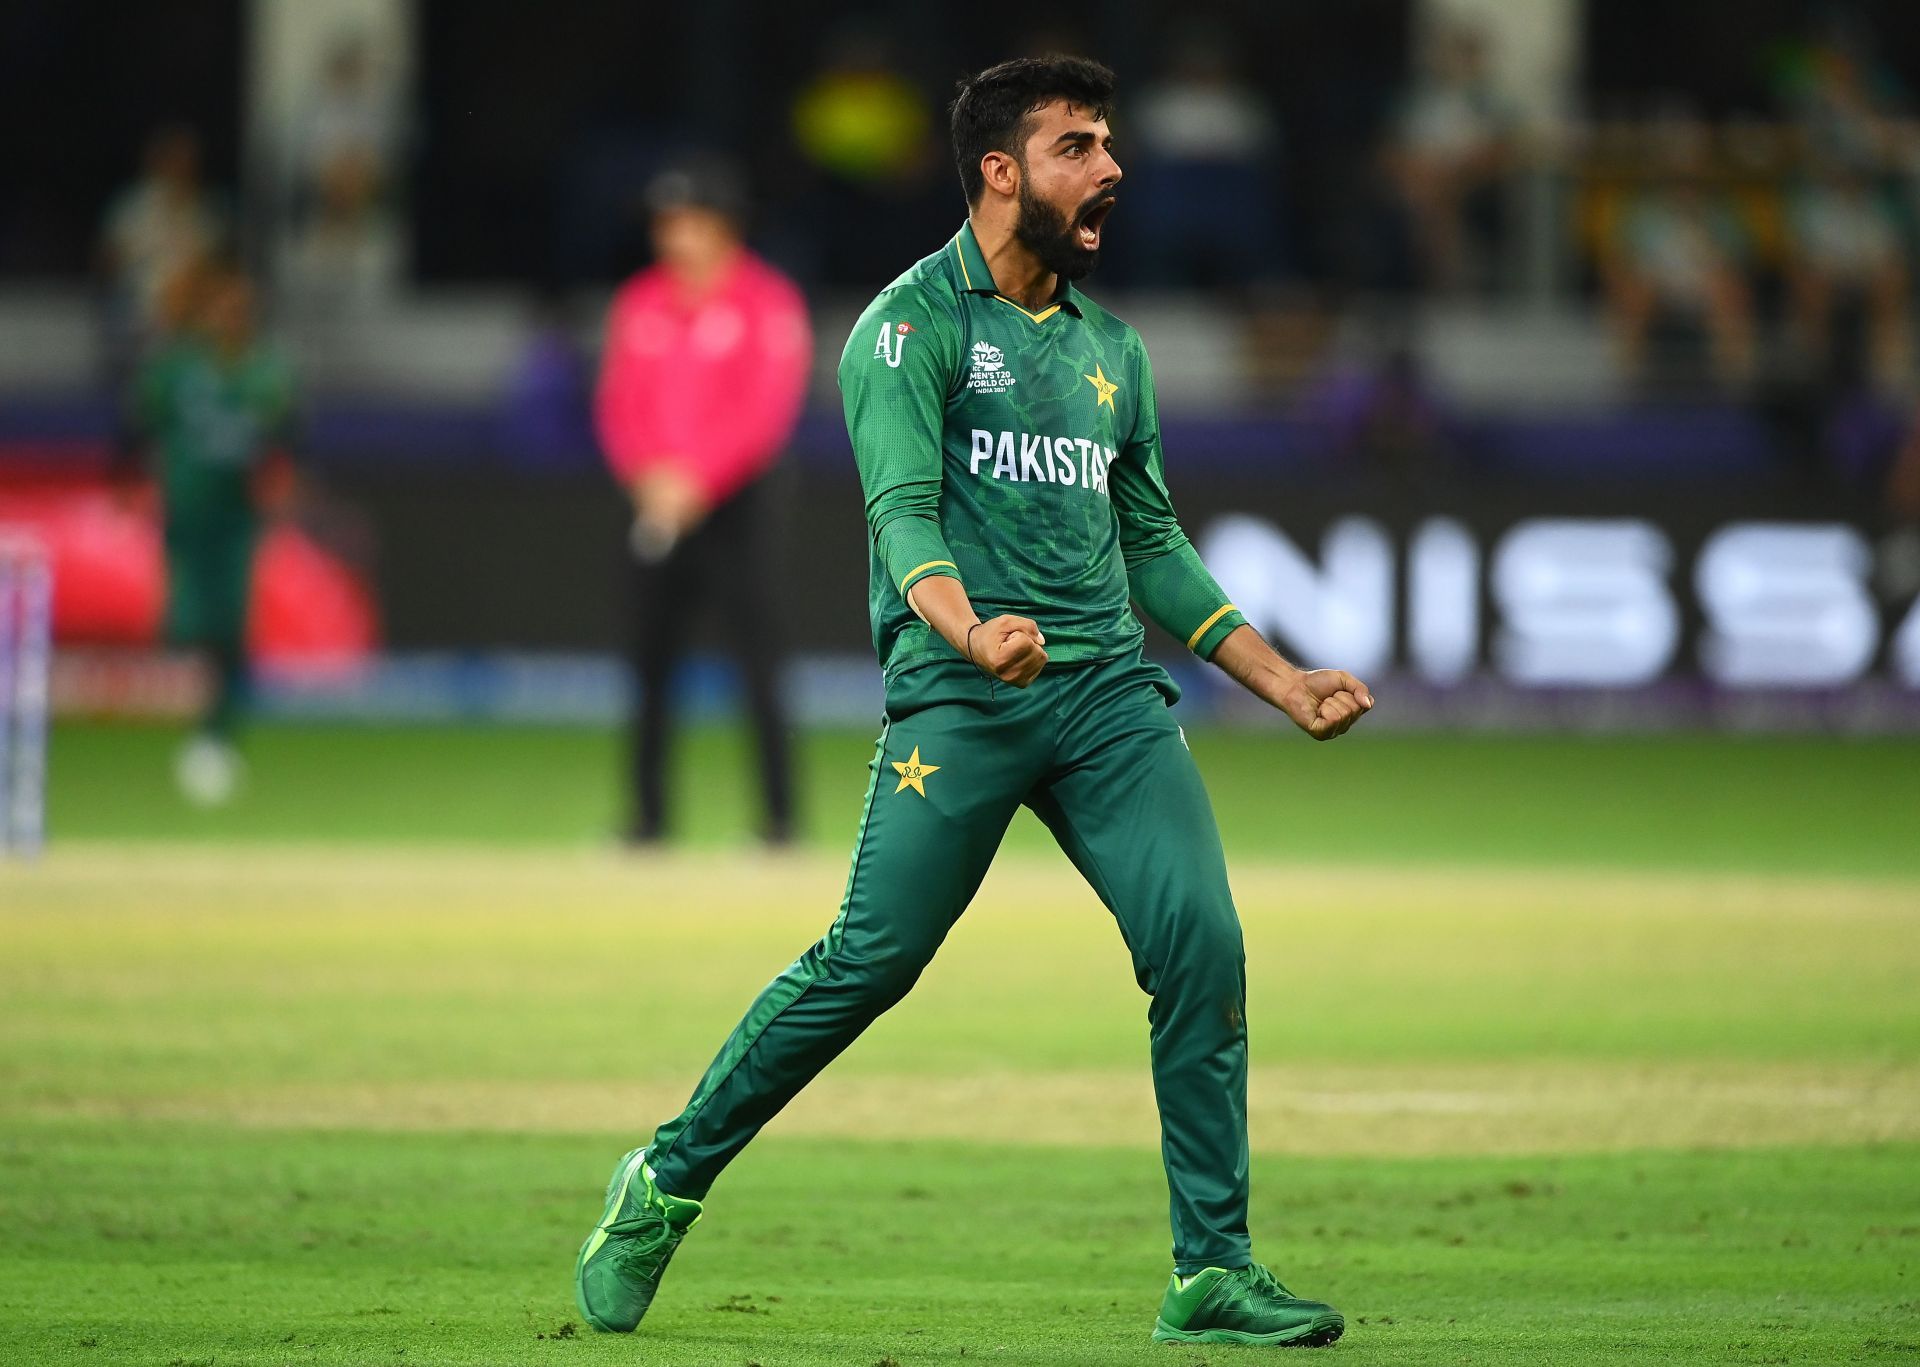 Shadab Khan was a standout performer in the T20 World Cup